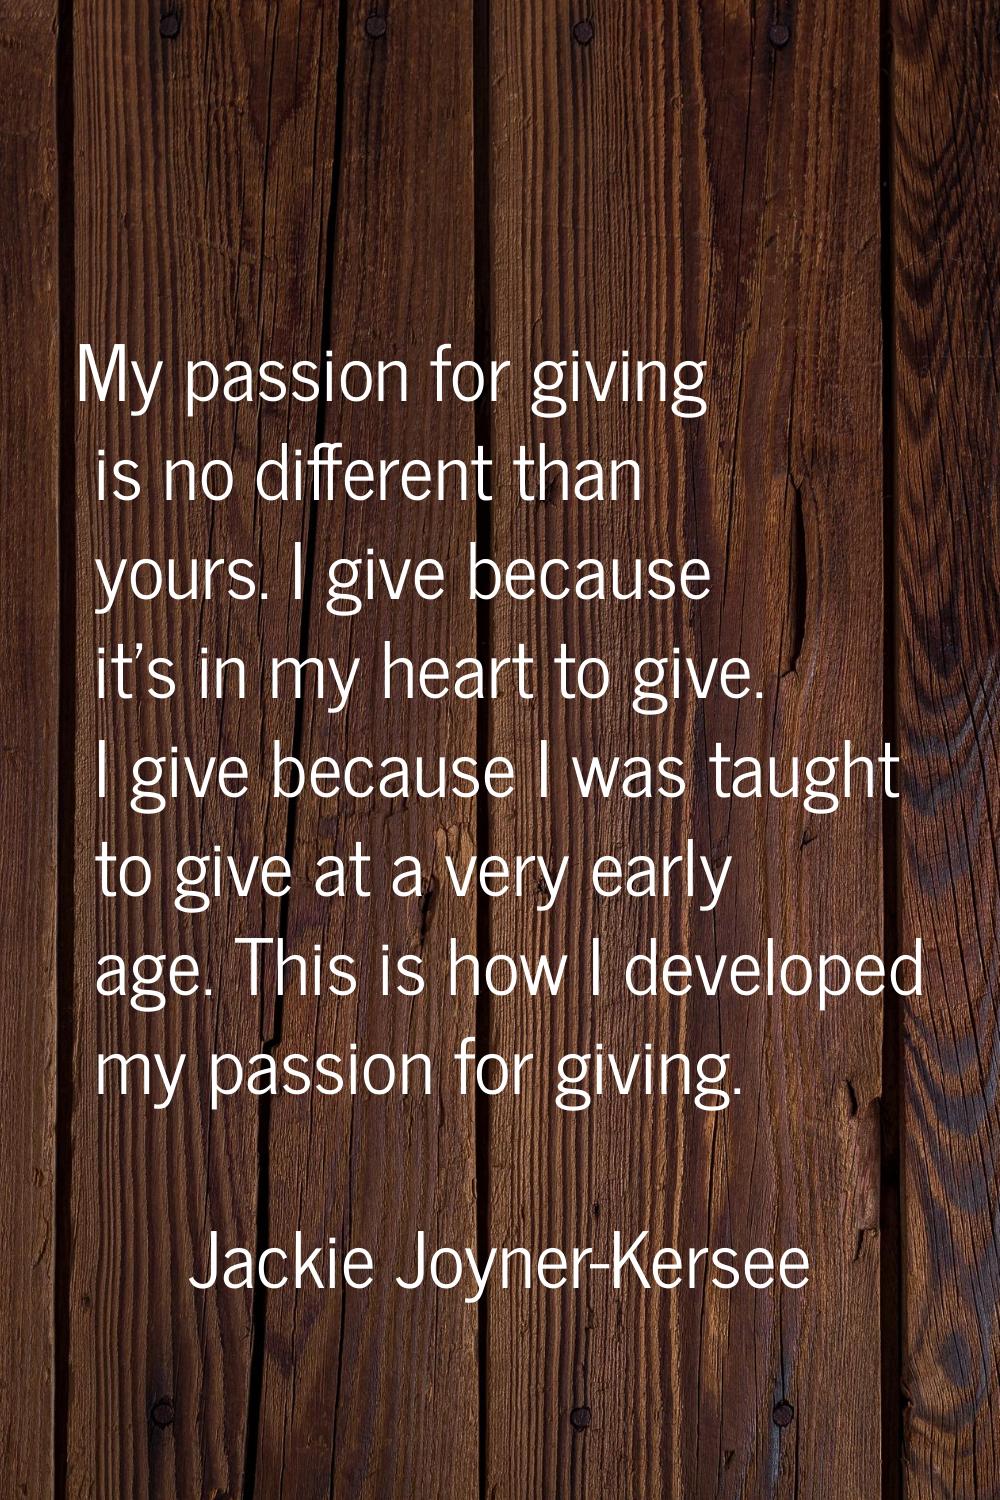 My passion for giving is no different than yours. I give because it's in my heart to give. I give b